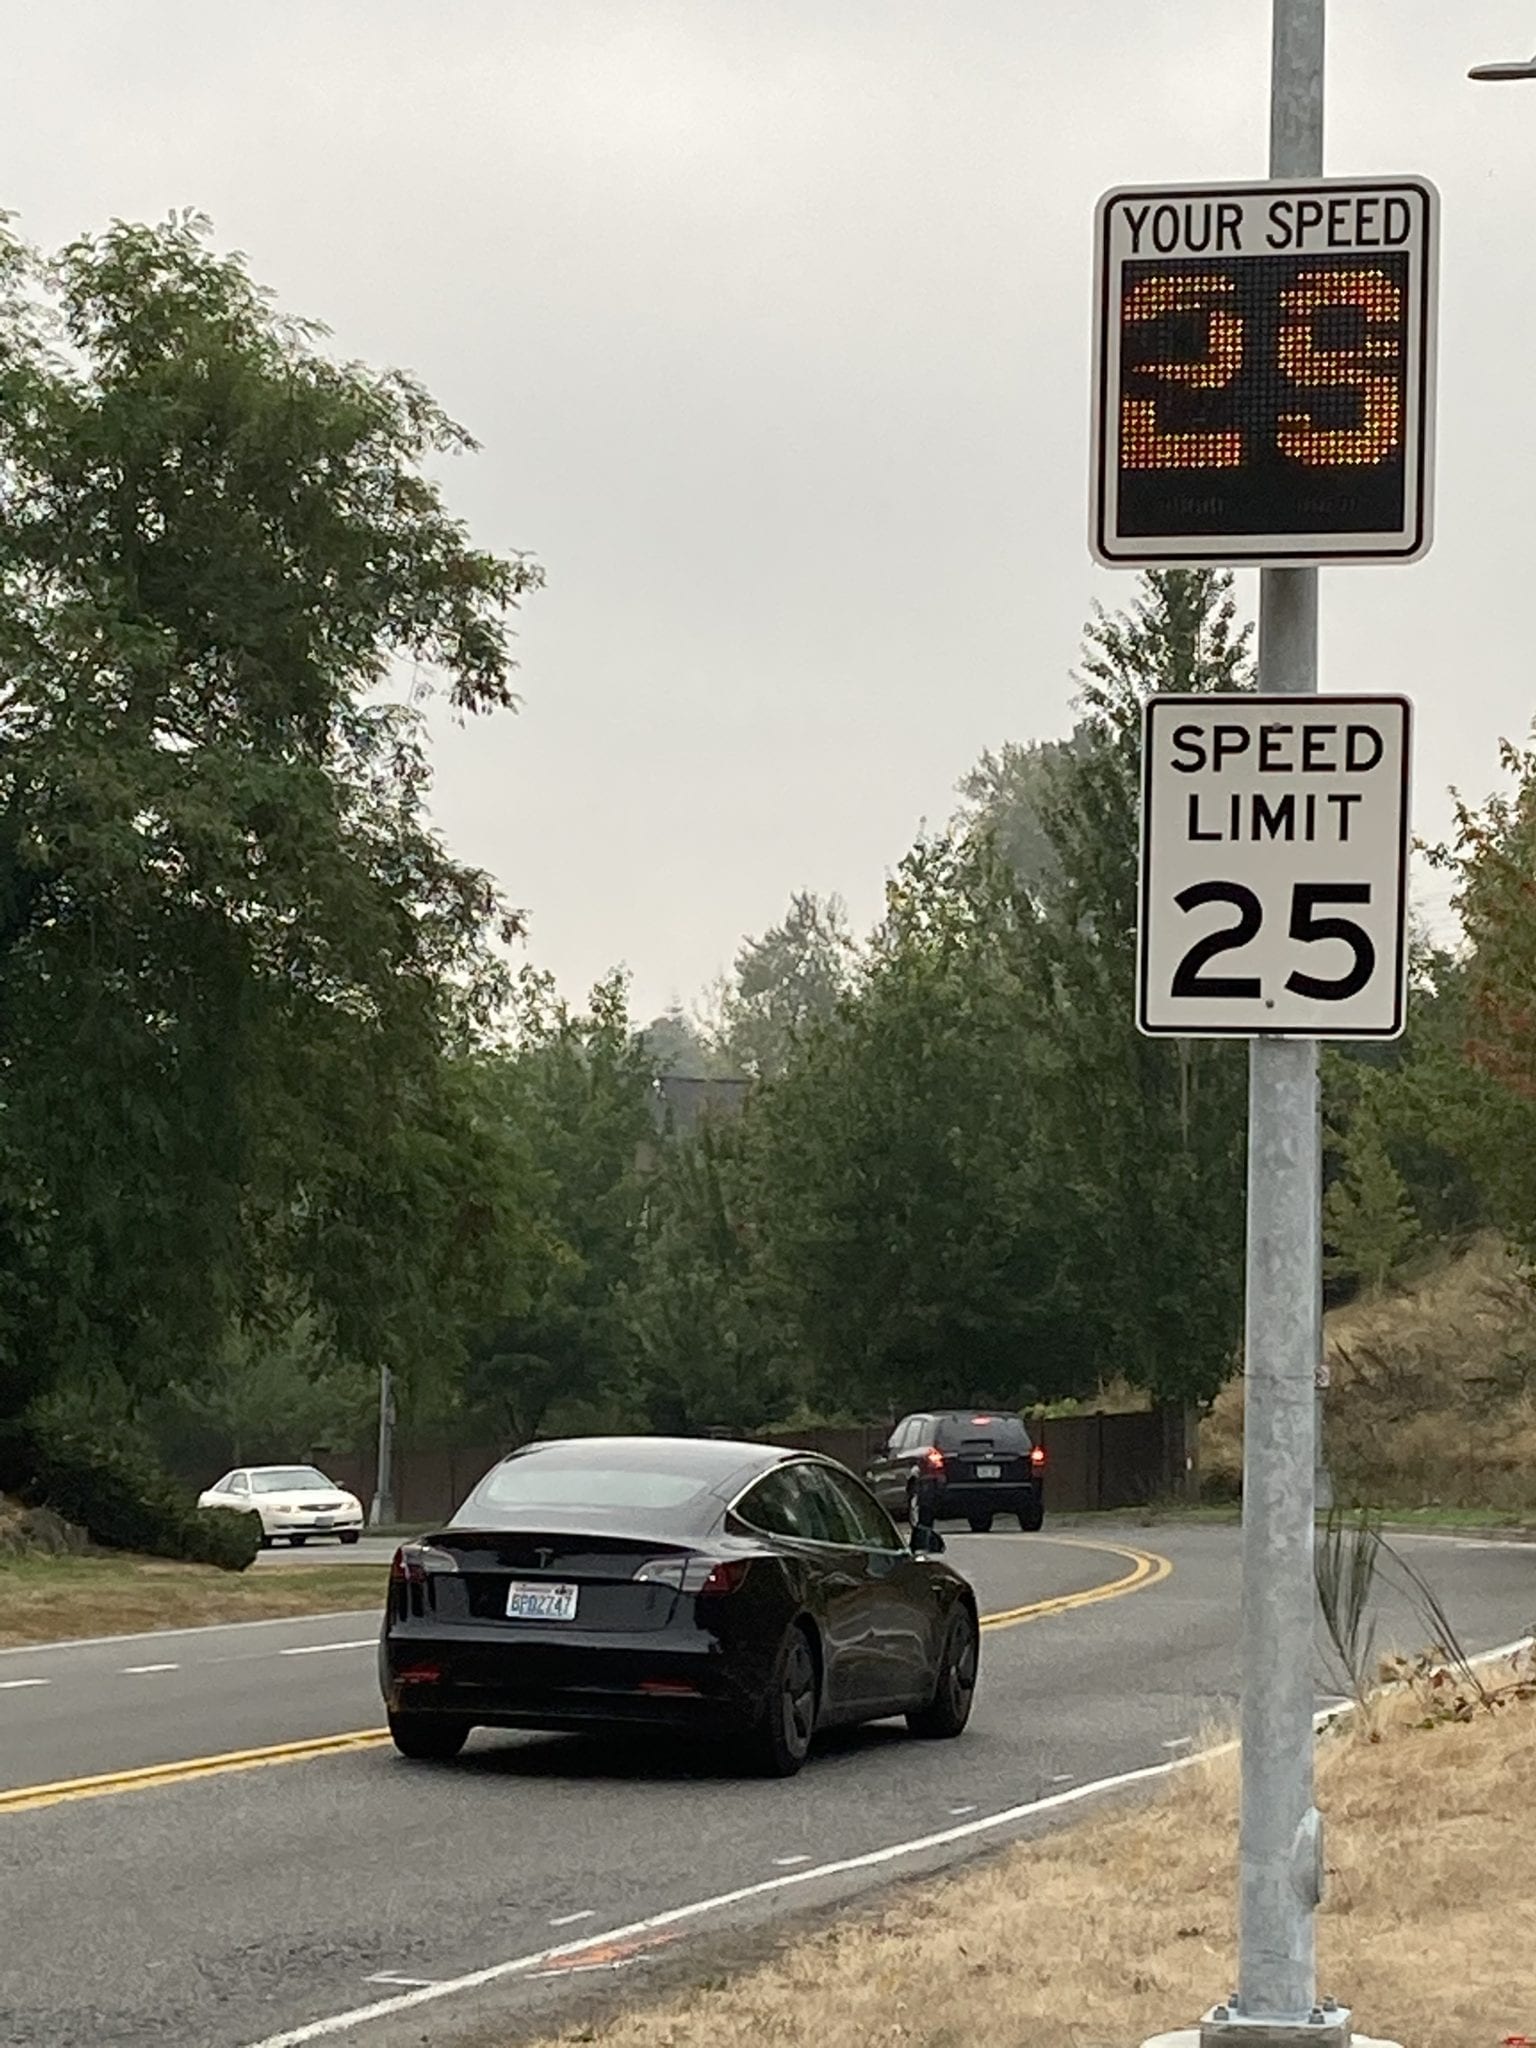 Several cars going by a speed monitoring device showing a speed limit of 25 mph.